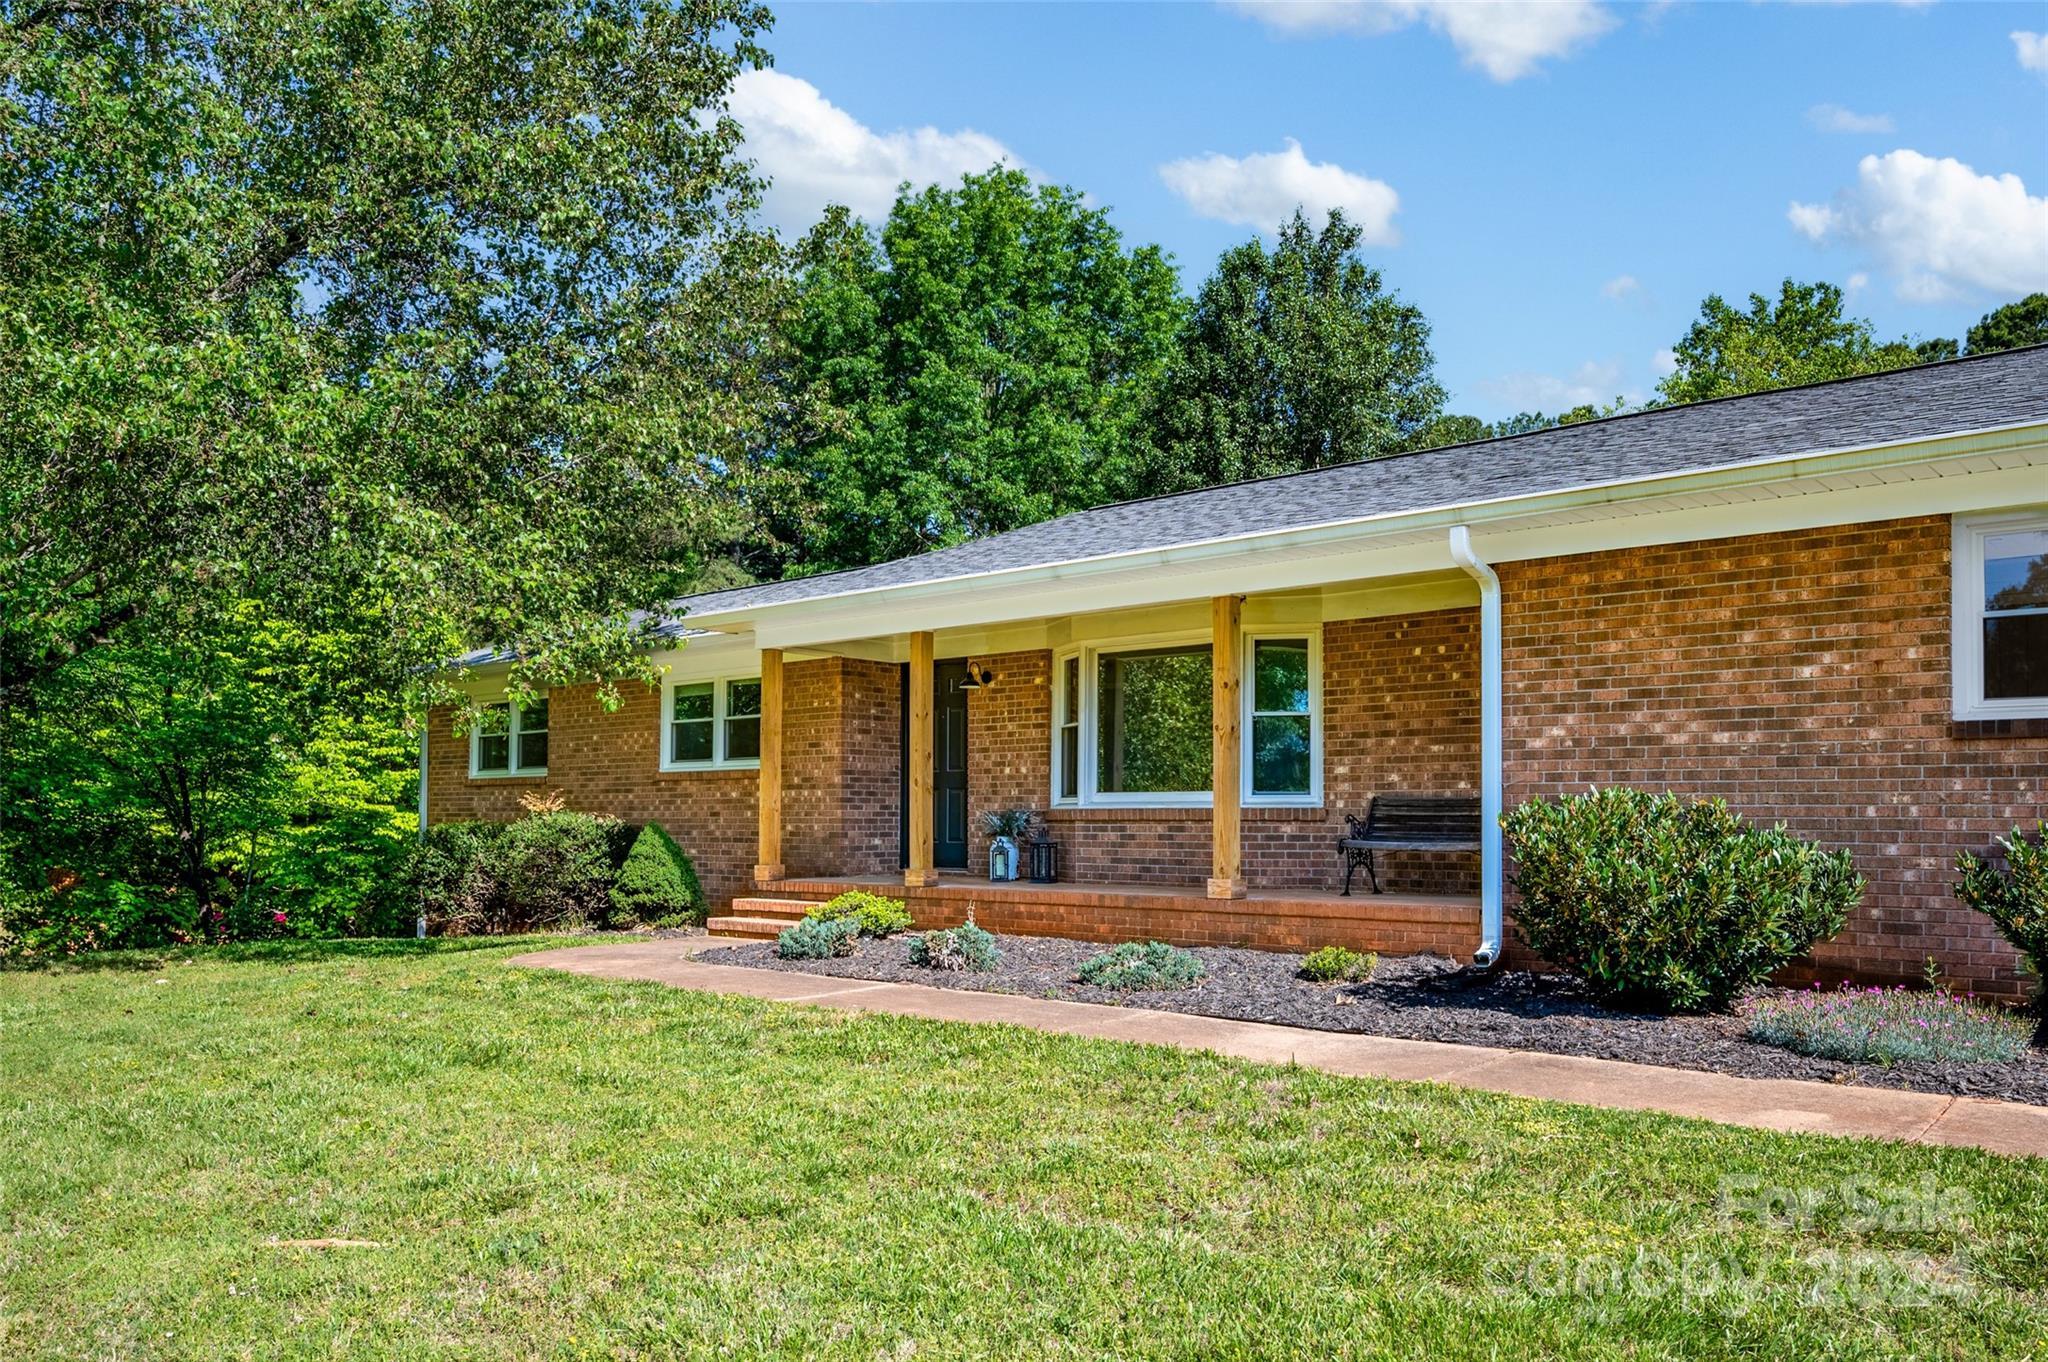 Photo one of 326 Gilbert Rd Statesville NC 28677 | MLS 4136346